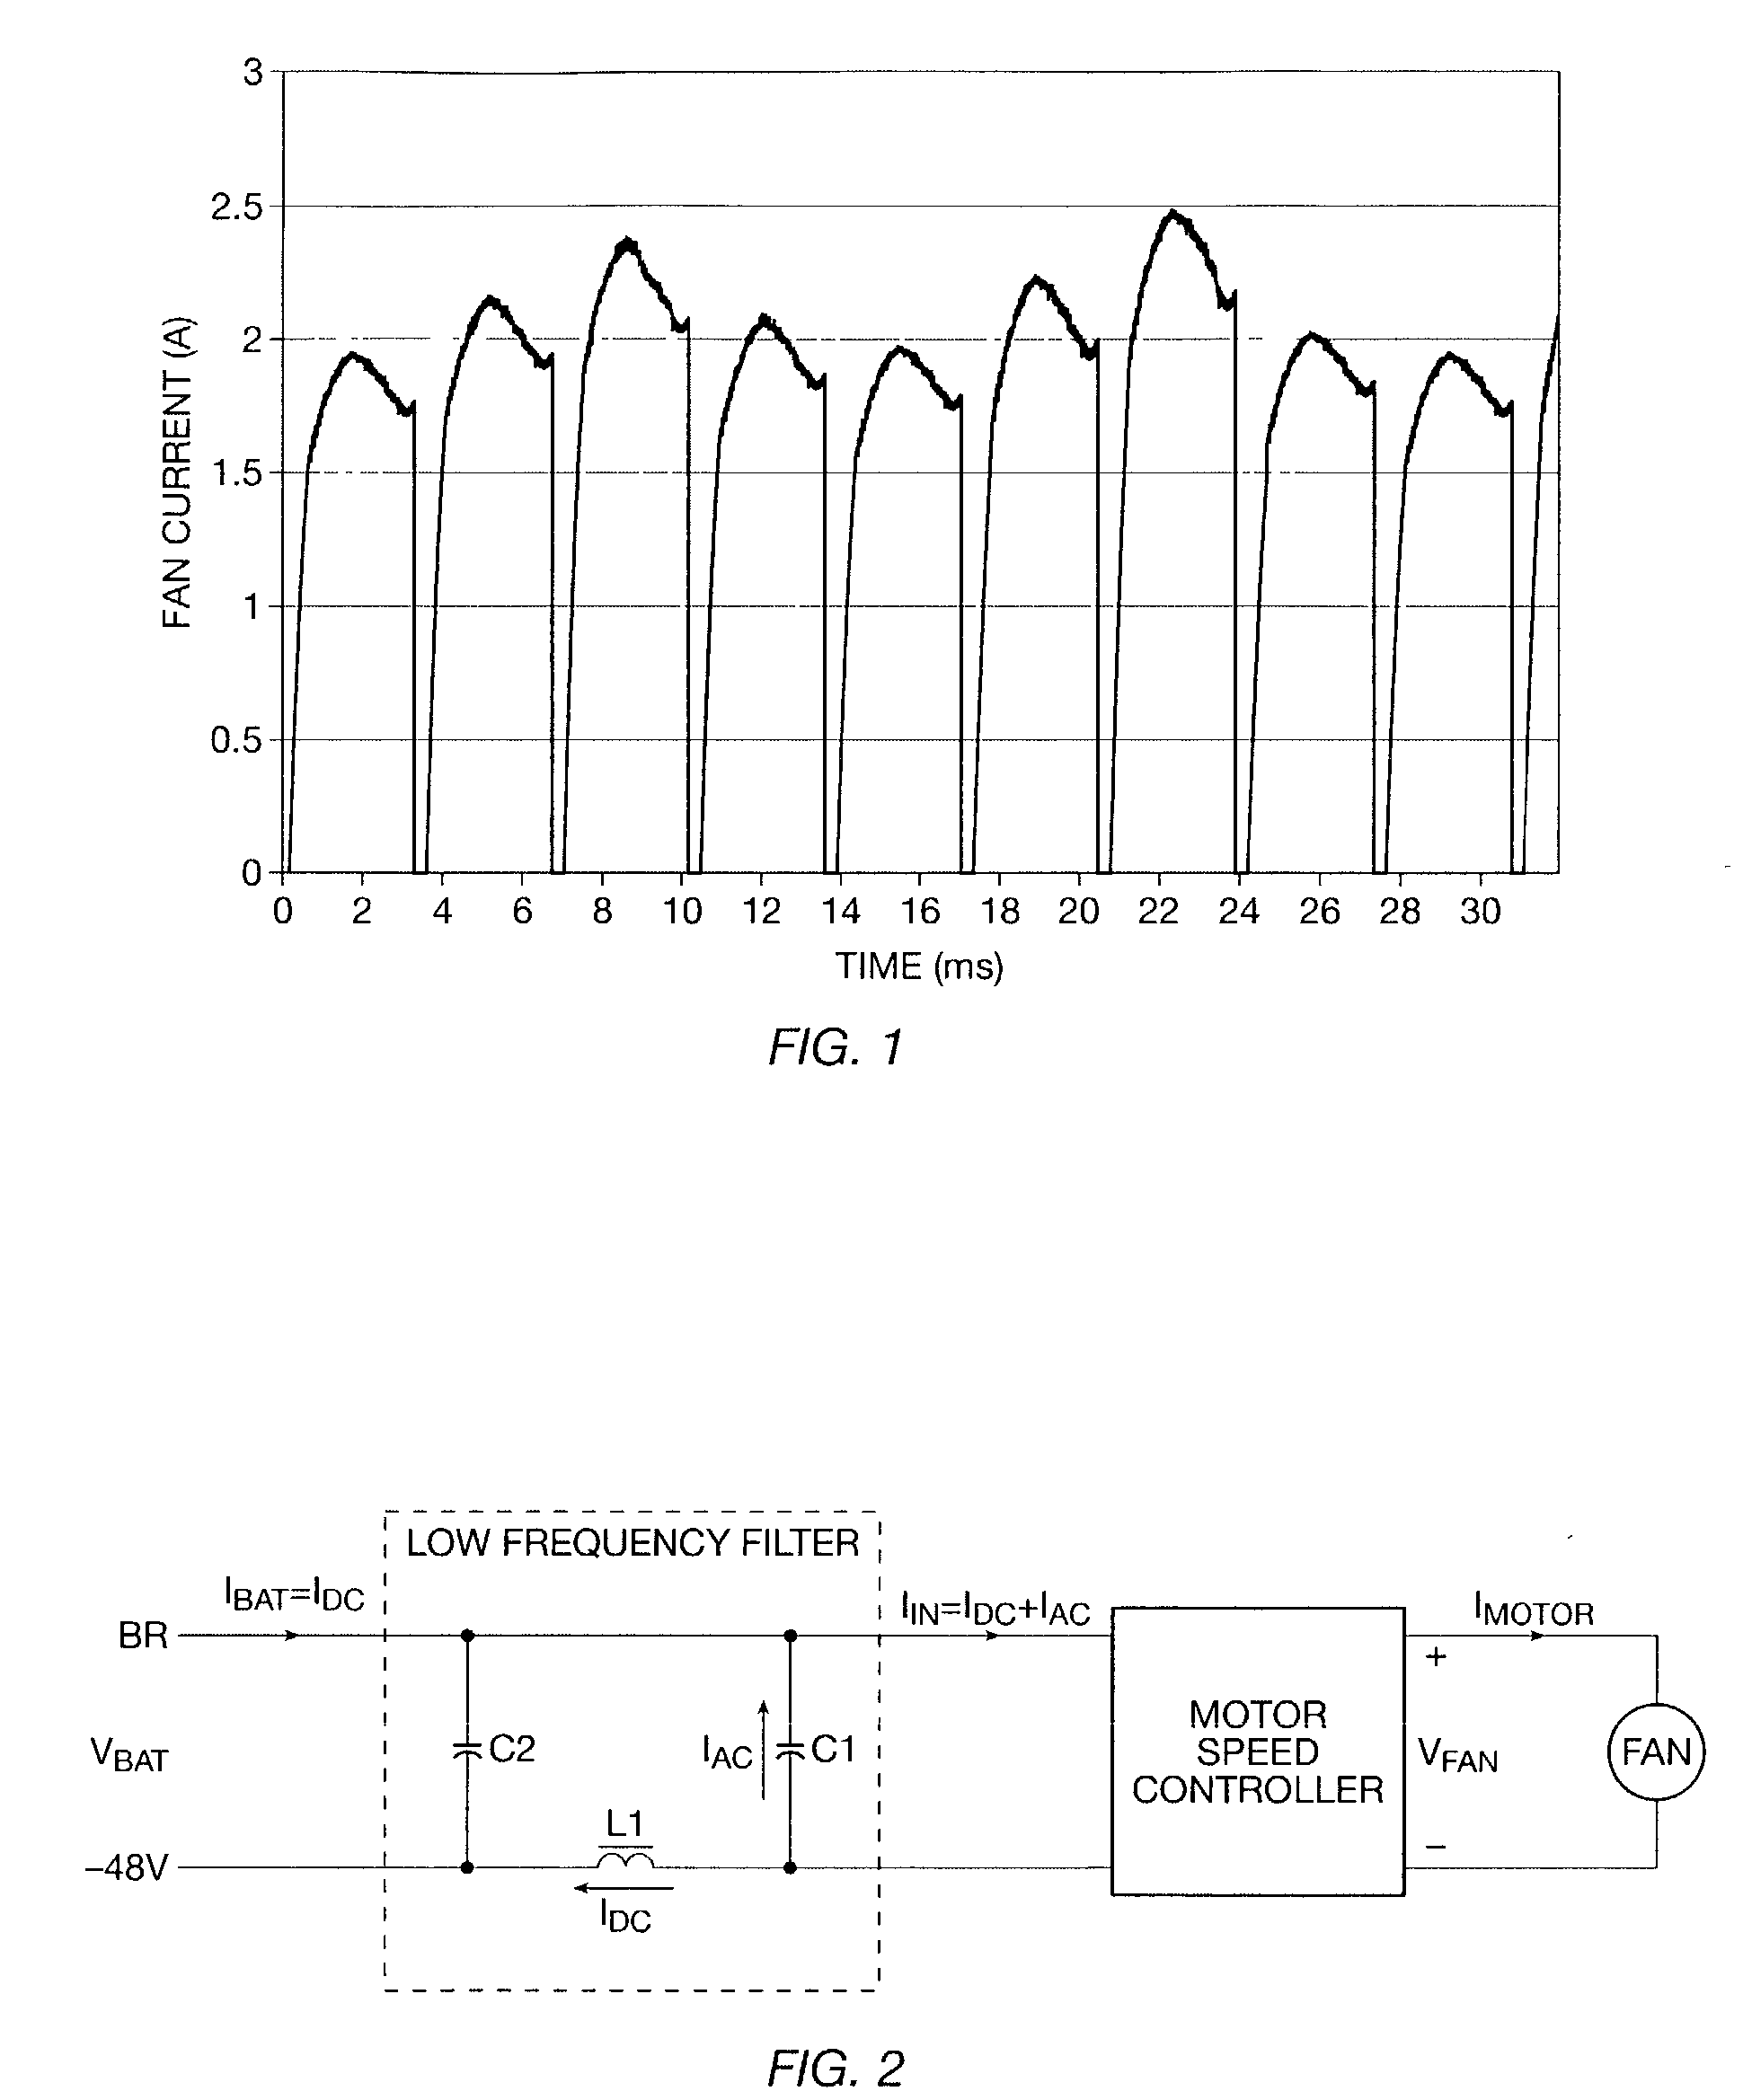 Apparatus and method of controlling low frequency load currents drawn from a DC source in a telecommunications system